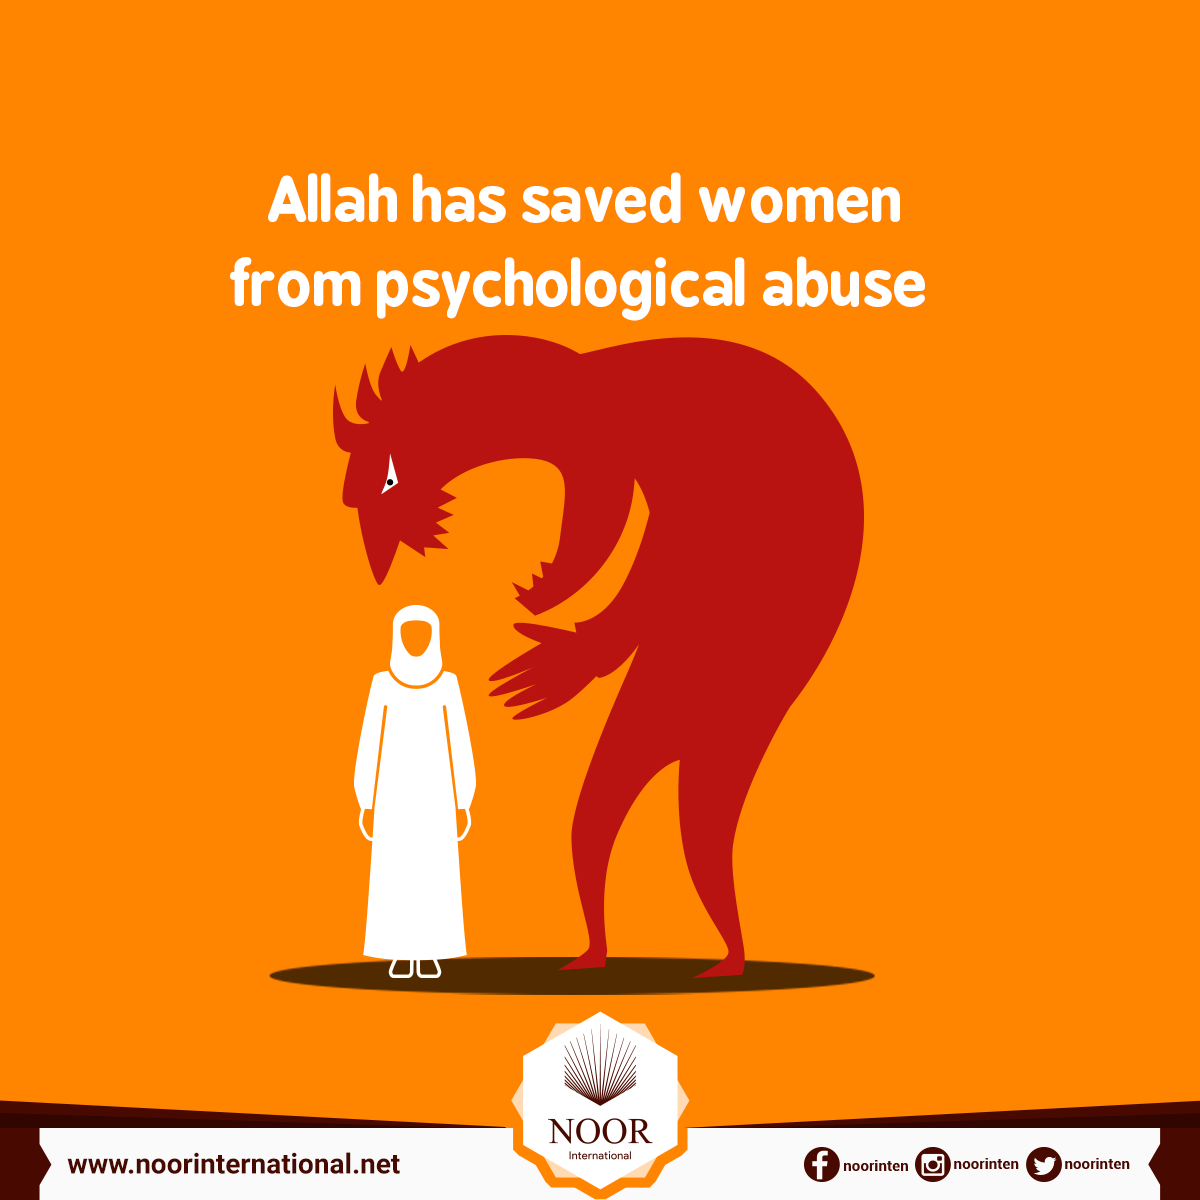 Allah has saved women from psychological abuse